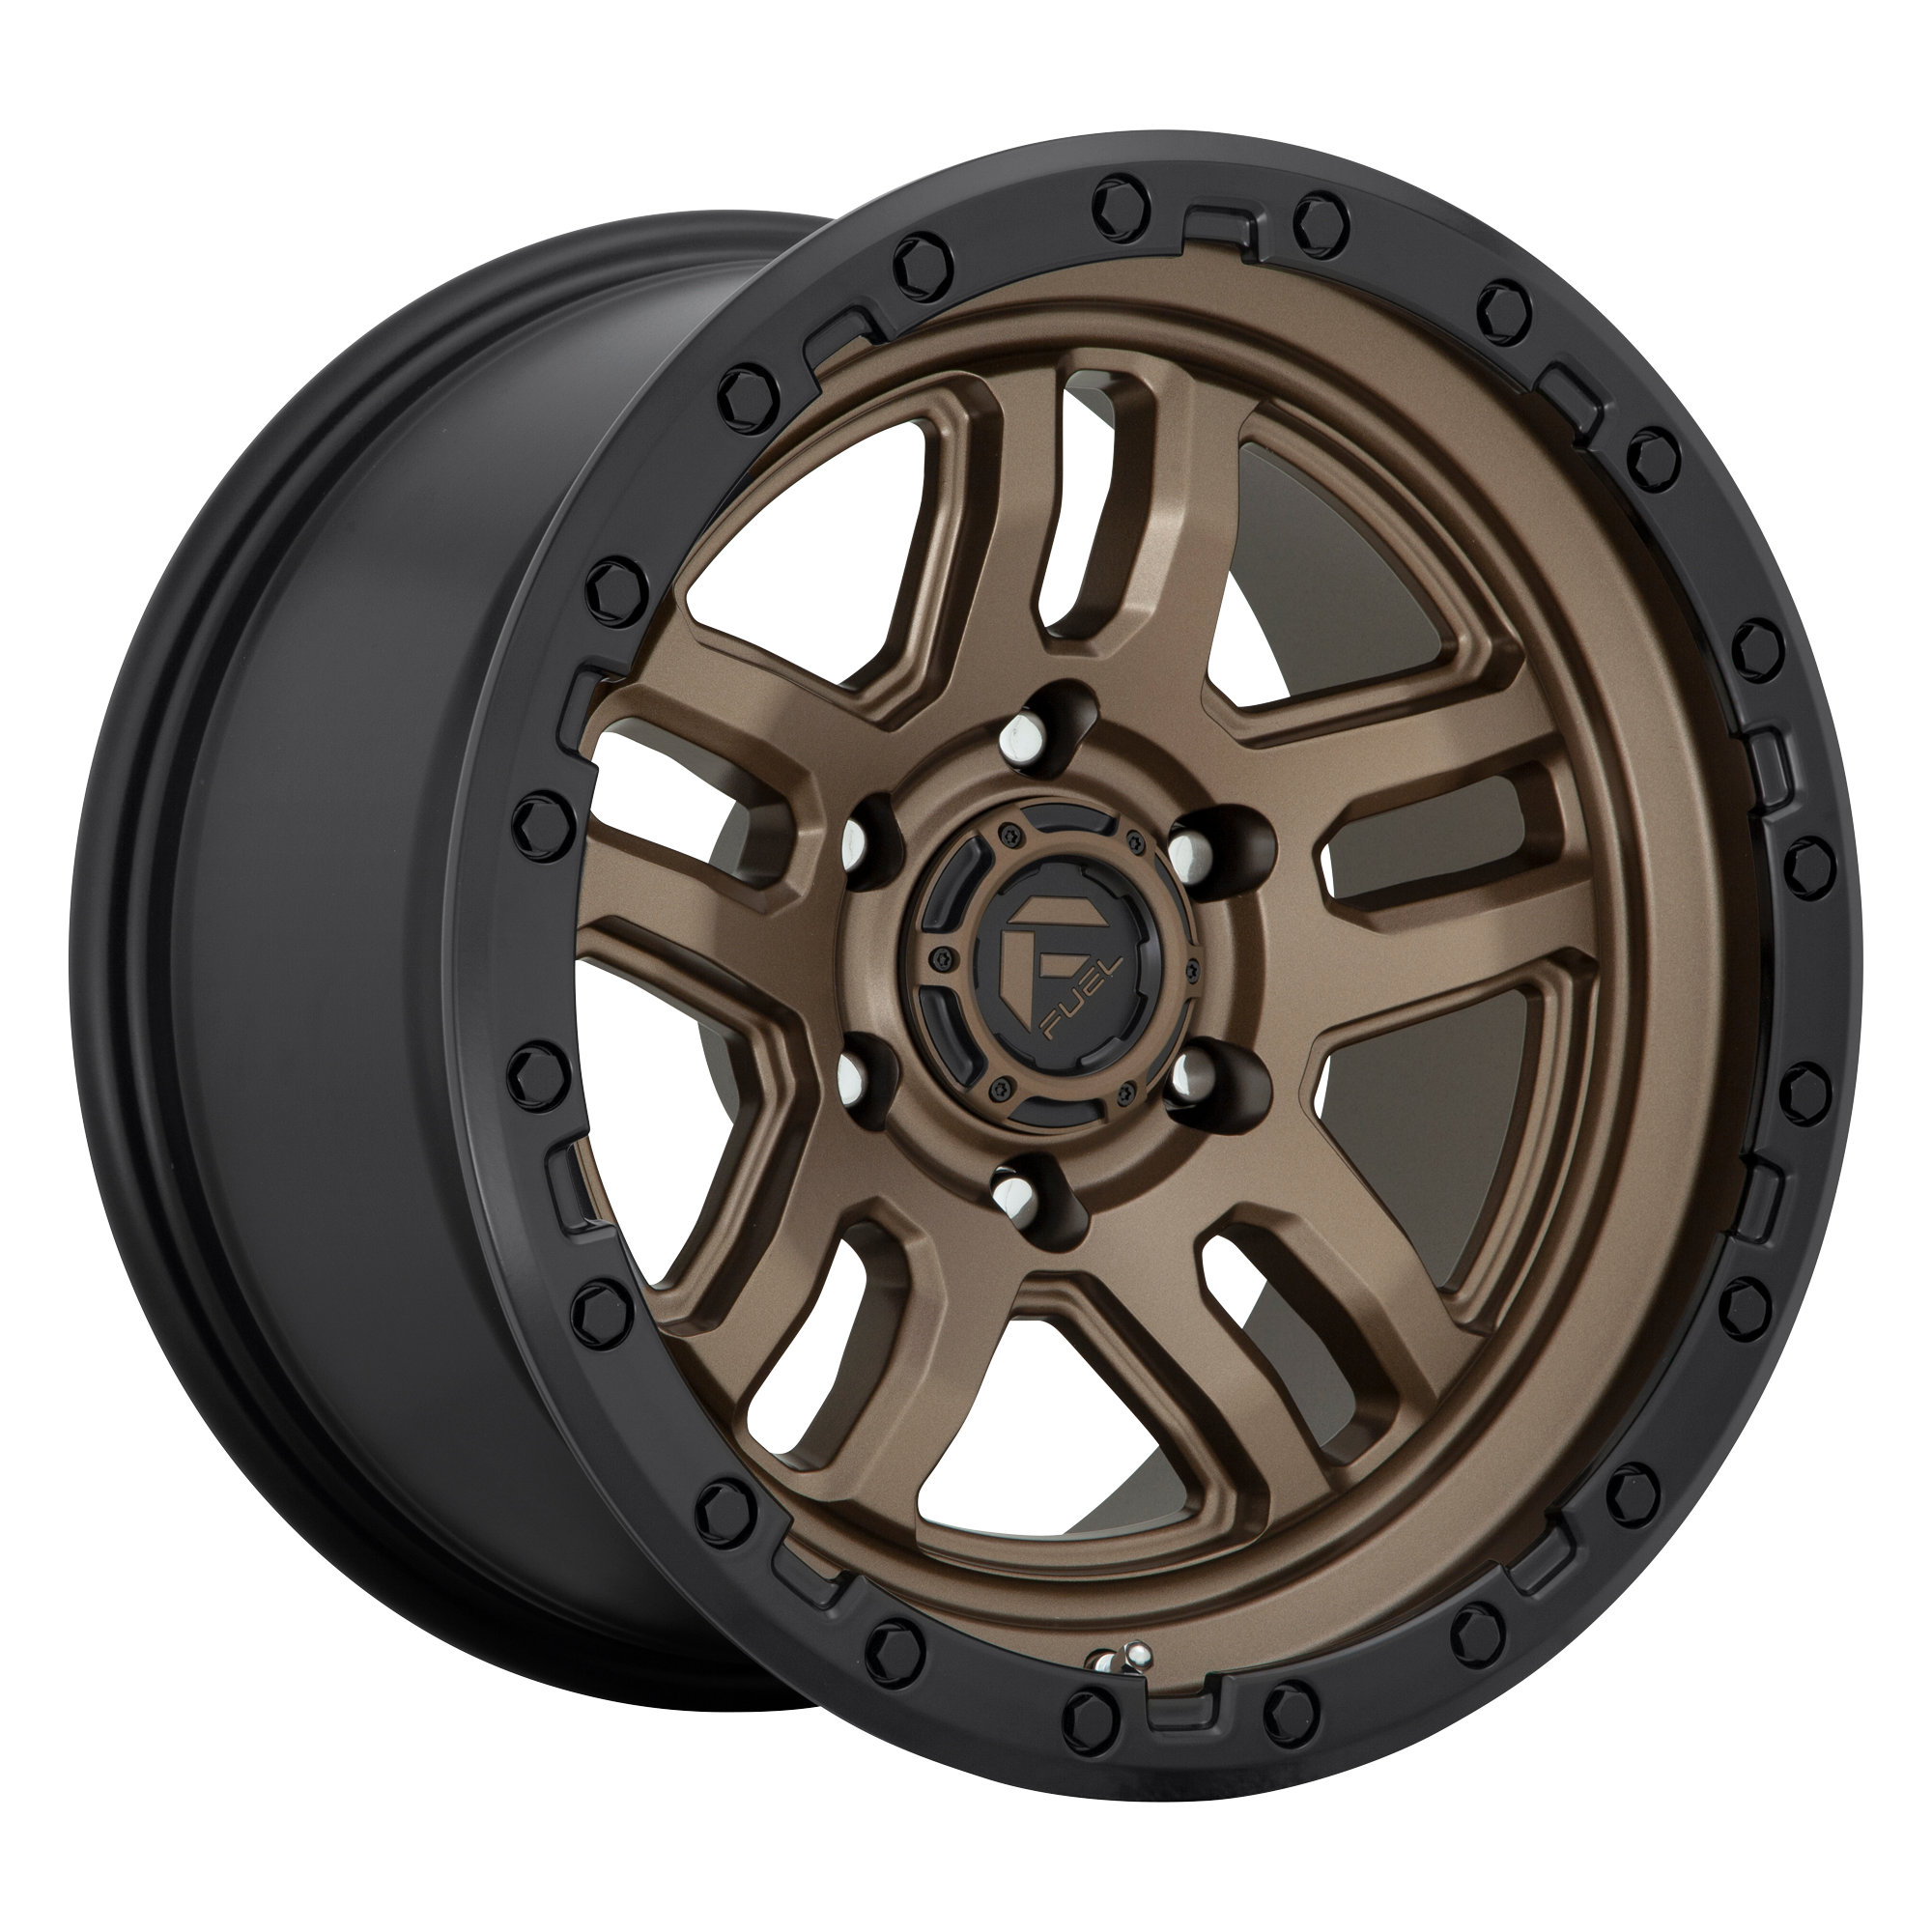 AMMO 17x9 5x127.00 MATTE BRONZE BLACK BEAD RING (1 mm) - Tires and Engine Performance